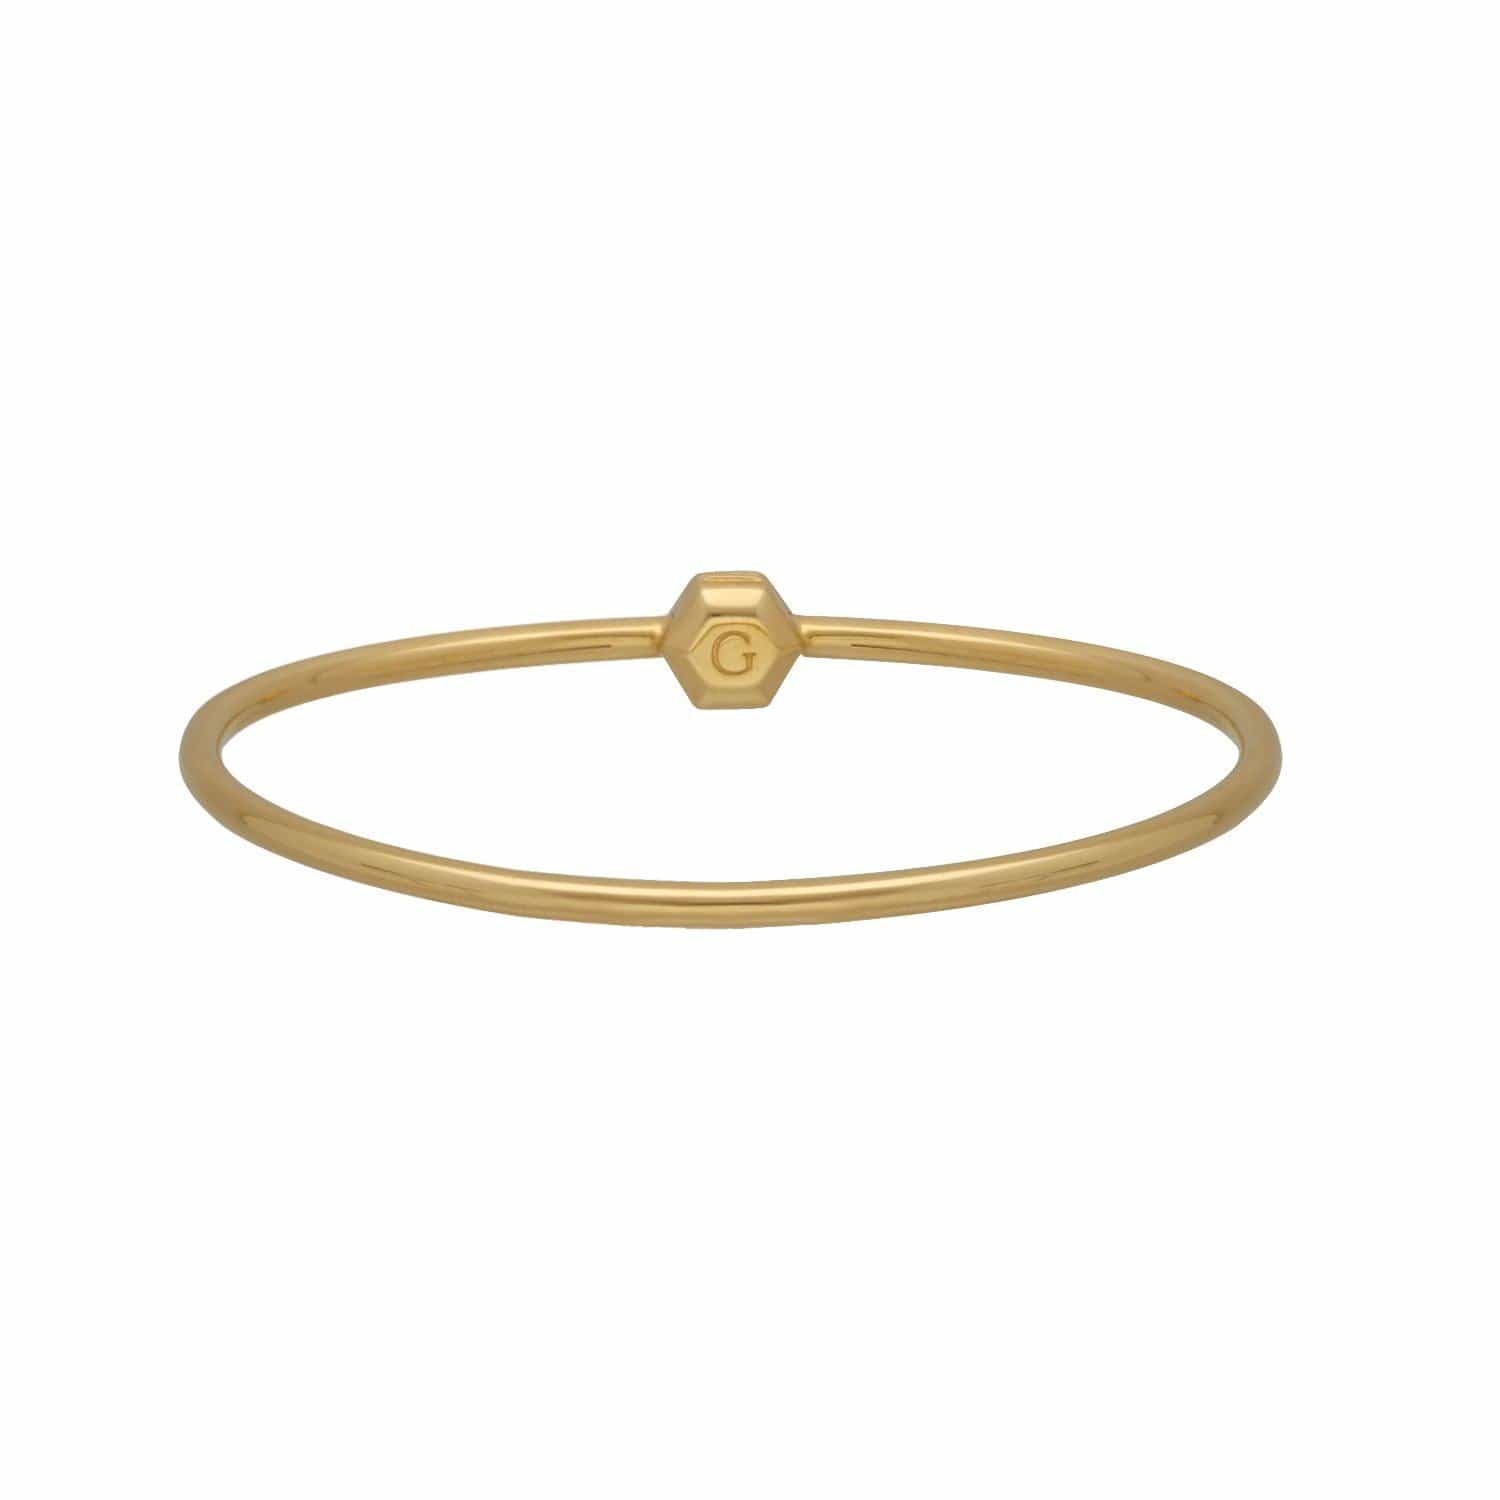 HS Achievement Bangle in gold plated sterling silver 1